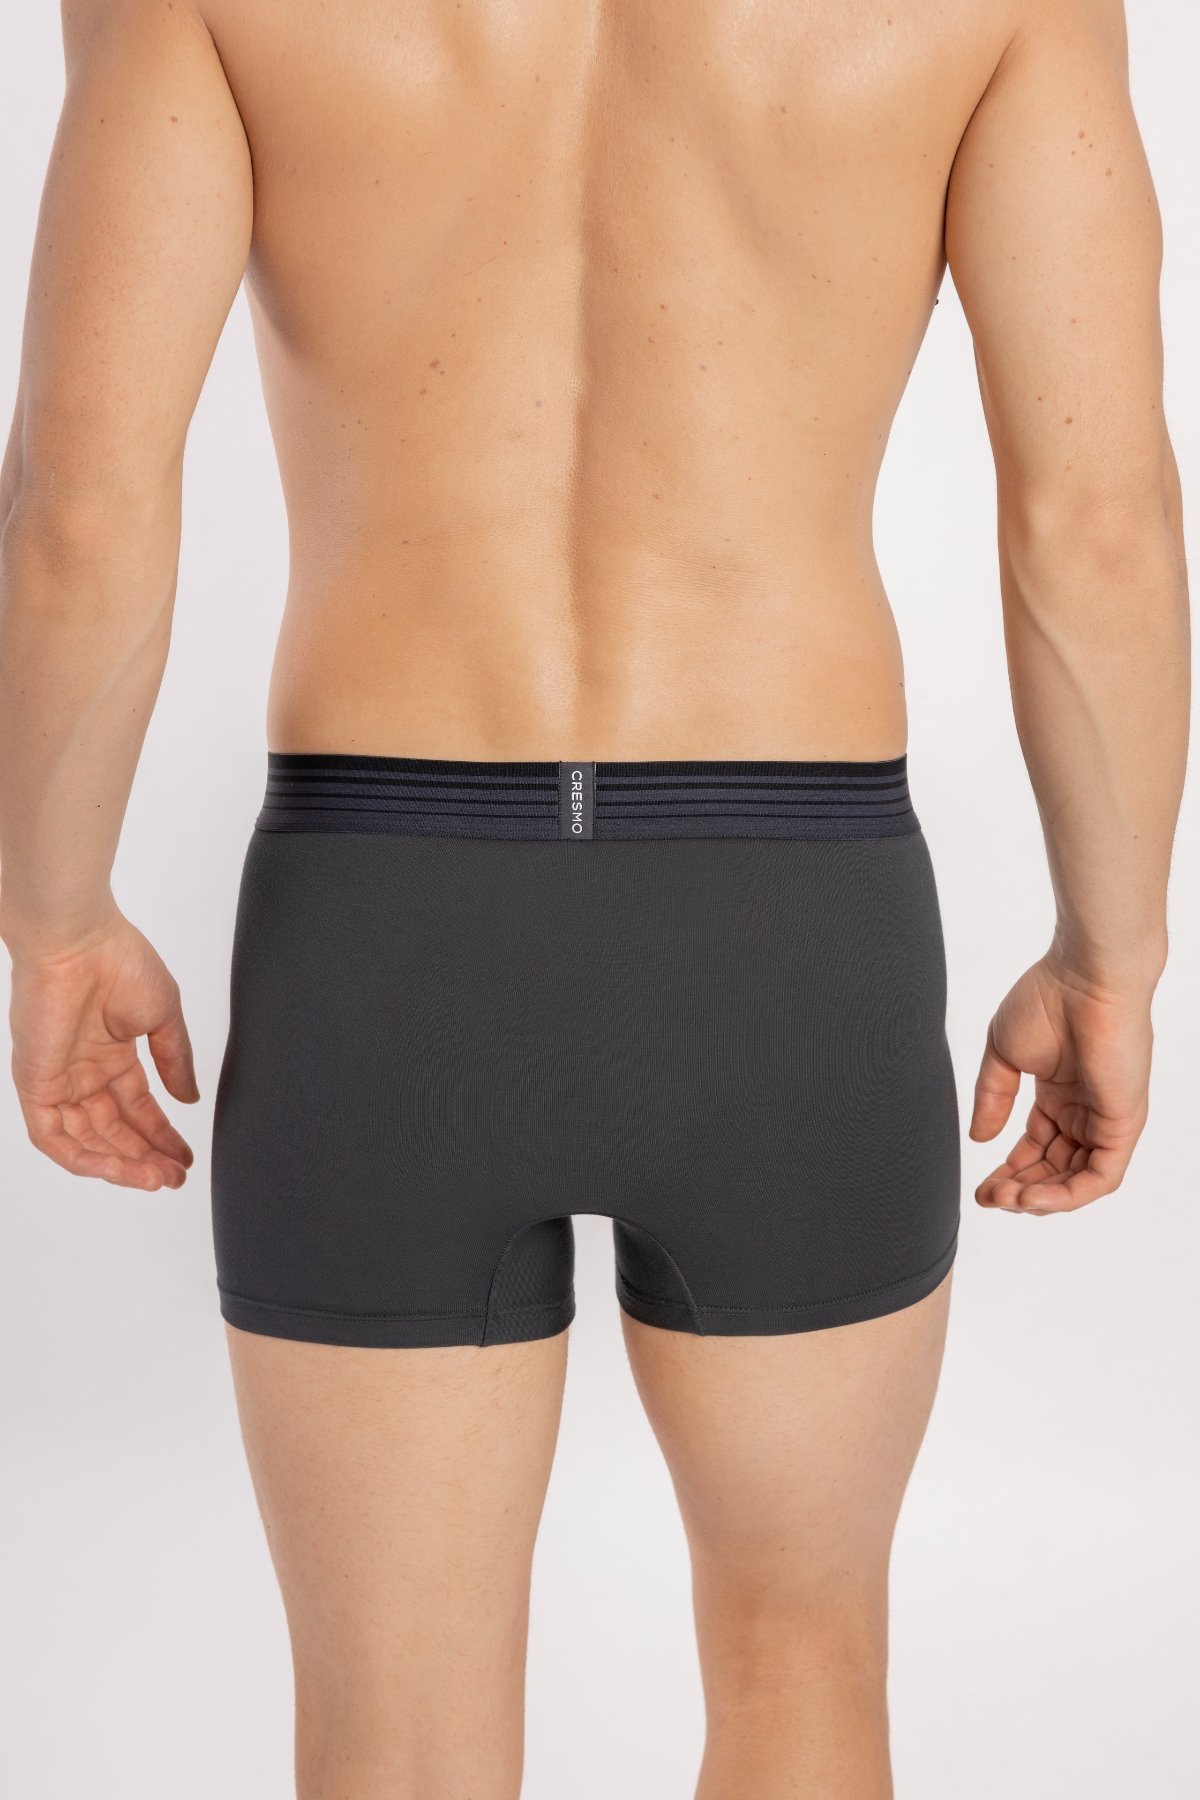 https://cdn.fynd.com/v2/falling-surf-7c8bb8/fyprod/wrkr/products/pictures/item/free/original/08Nv1_1Yy-CRESMO-Mens-Anti-Microbial-Micro-Modal-Underwear-Breathable-Ultra-Soft-Trunk-(Pack-Of-2).jpeg